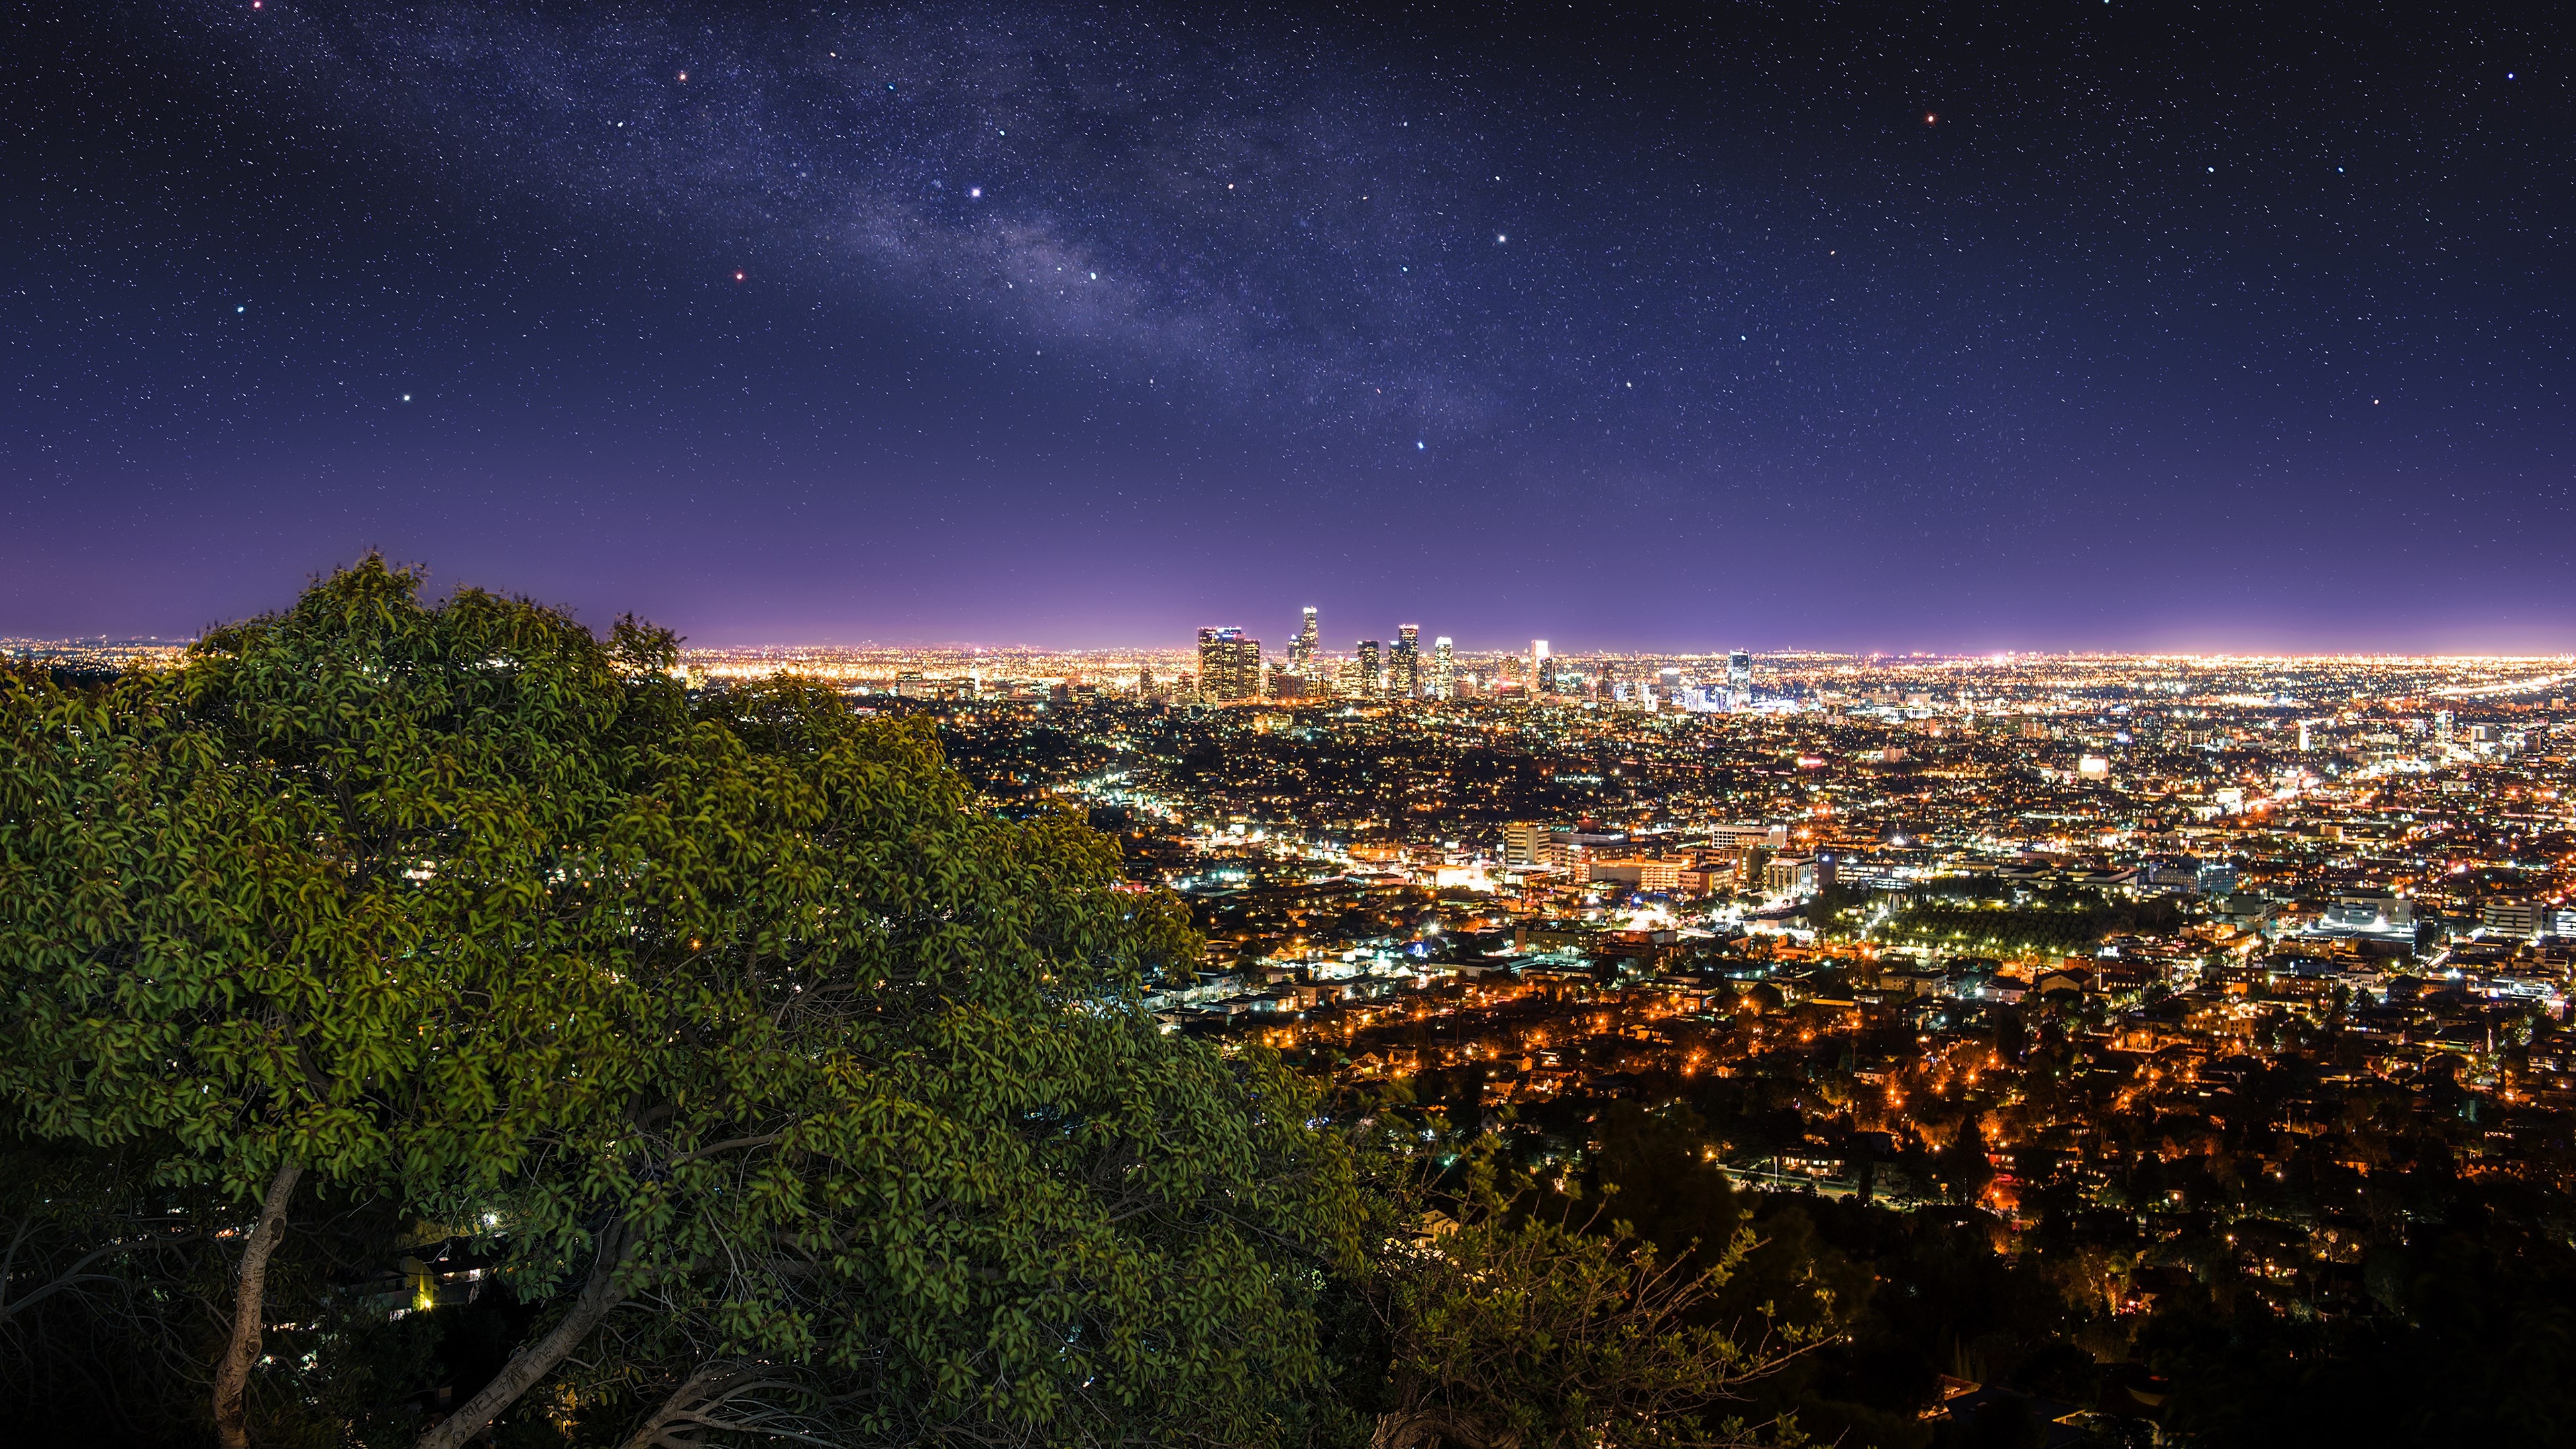 Los Angeles: Often referred to by its initials L.A., Nightscape. 3840x2160 4K Wallpaper.